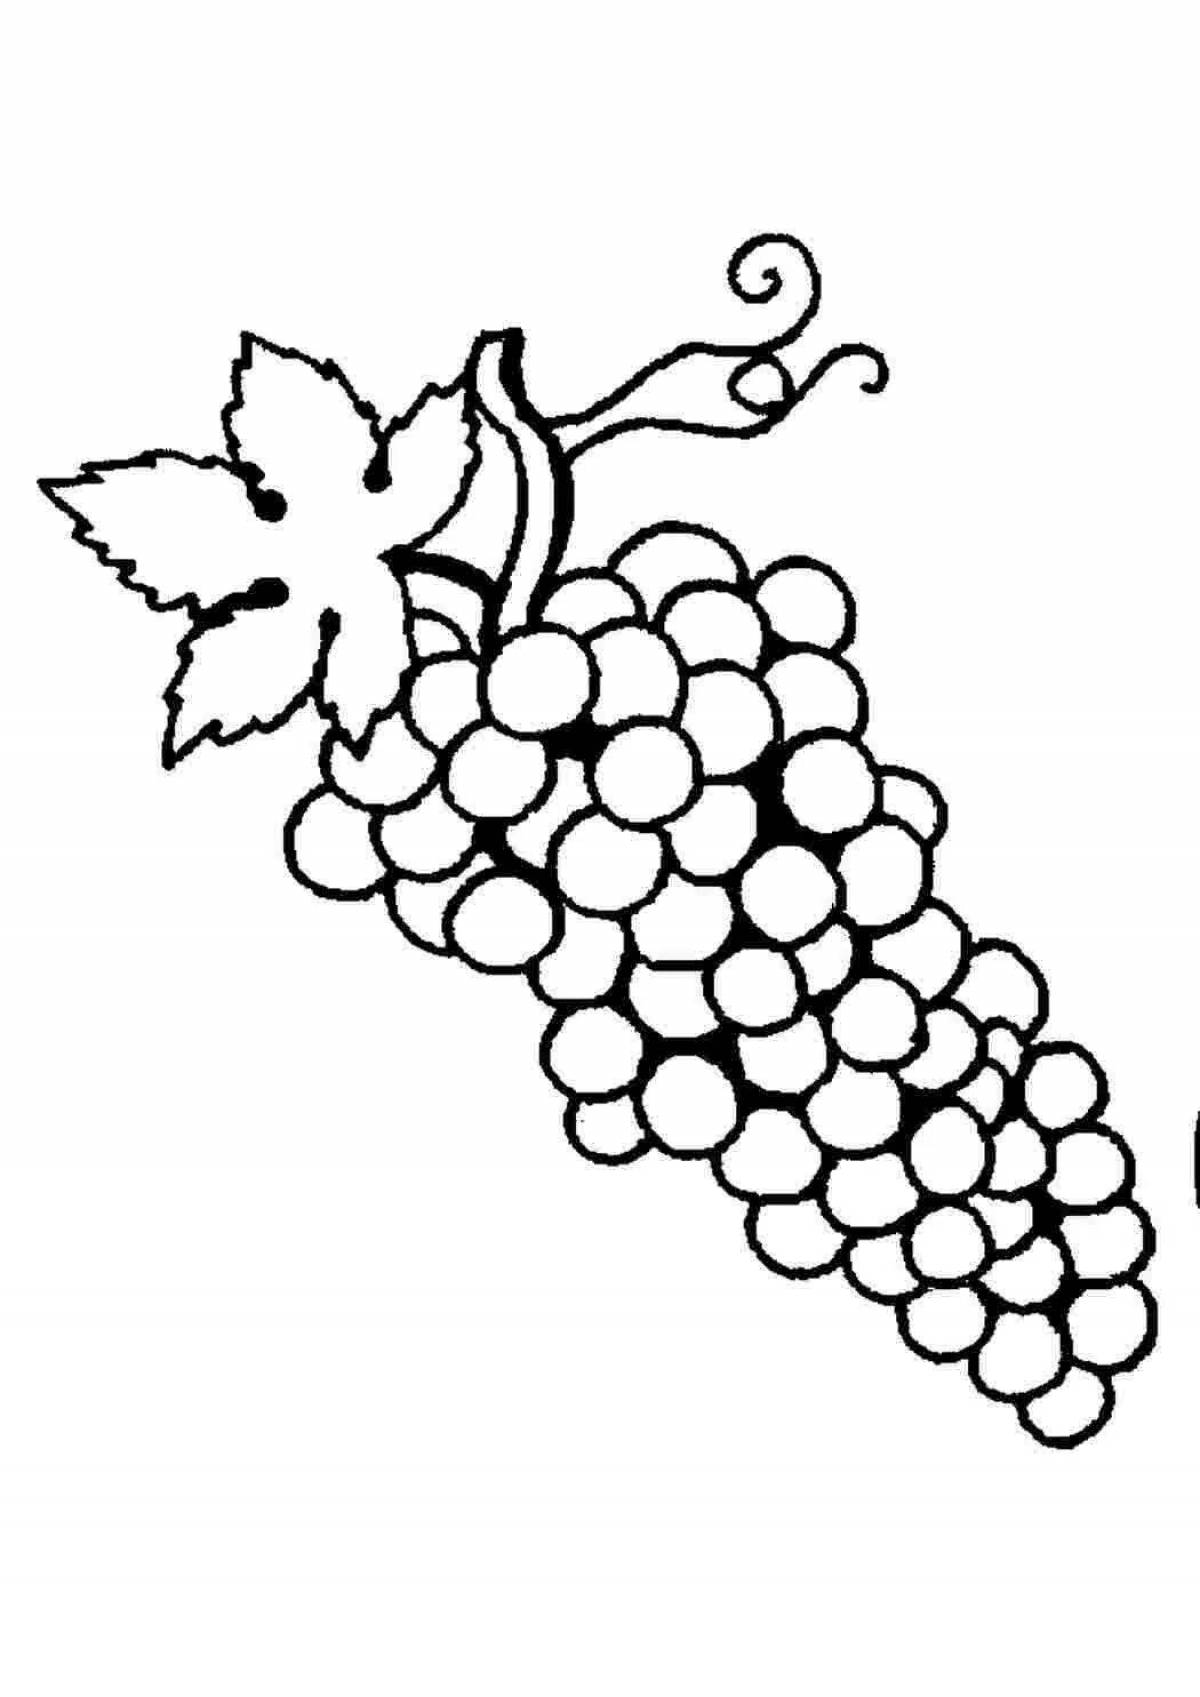 Glowing grapes coloring book for 5-6 year olds